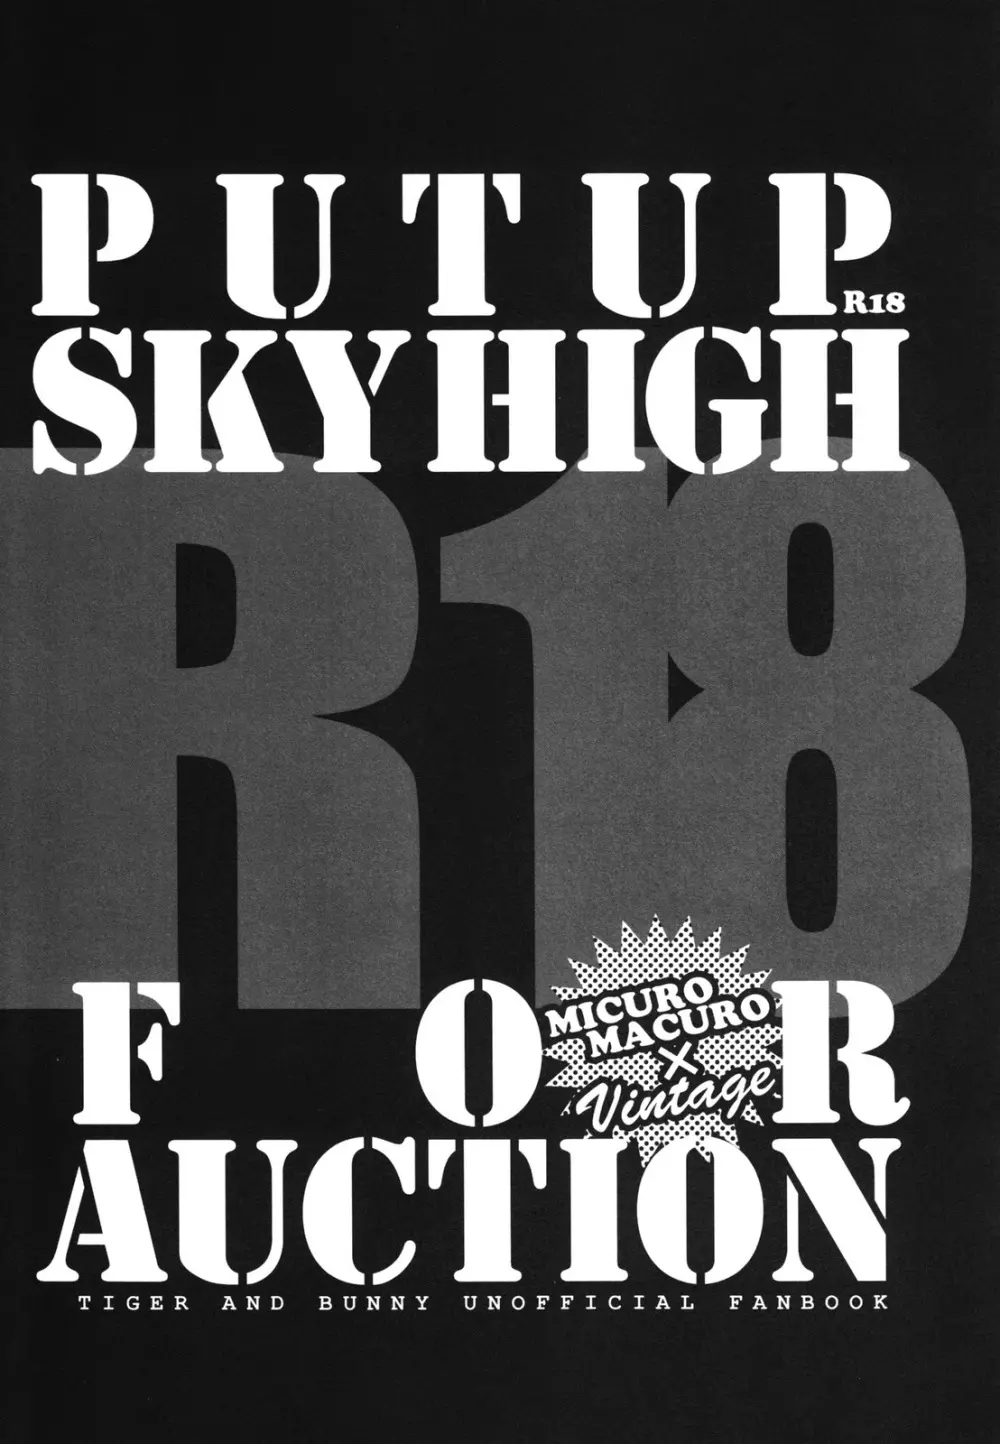 PUT UP SKYHIGH FOR AUCTION 2ページ